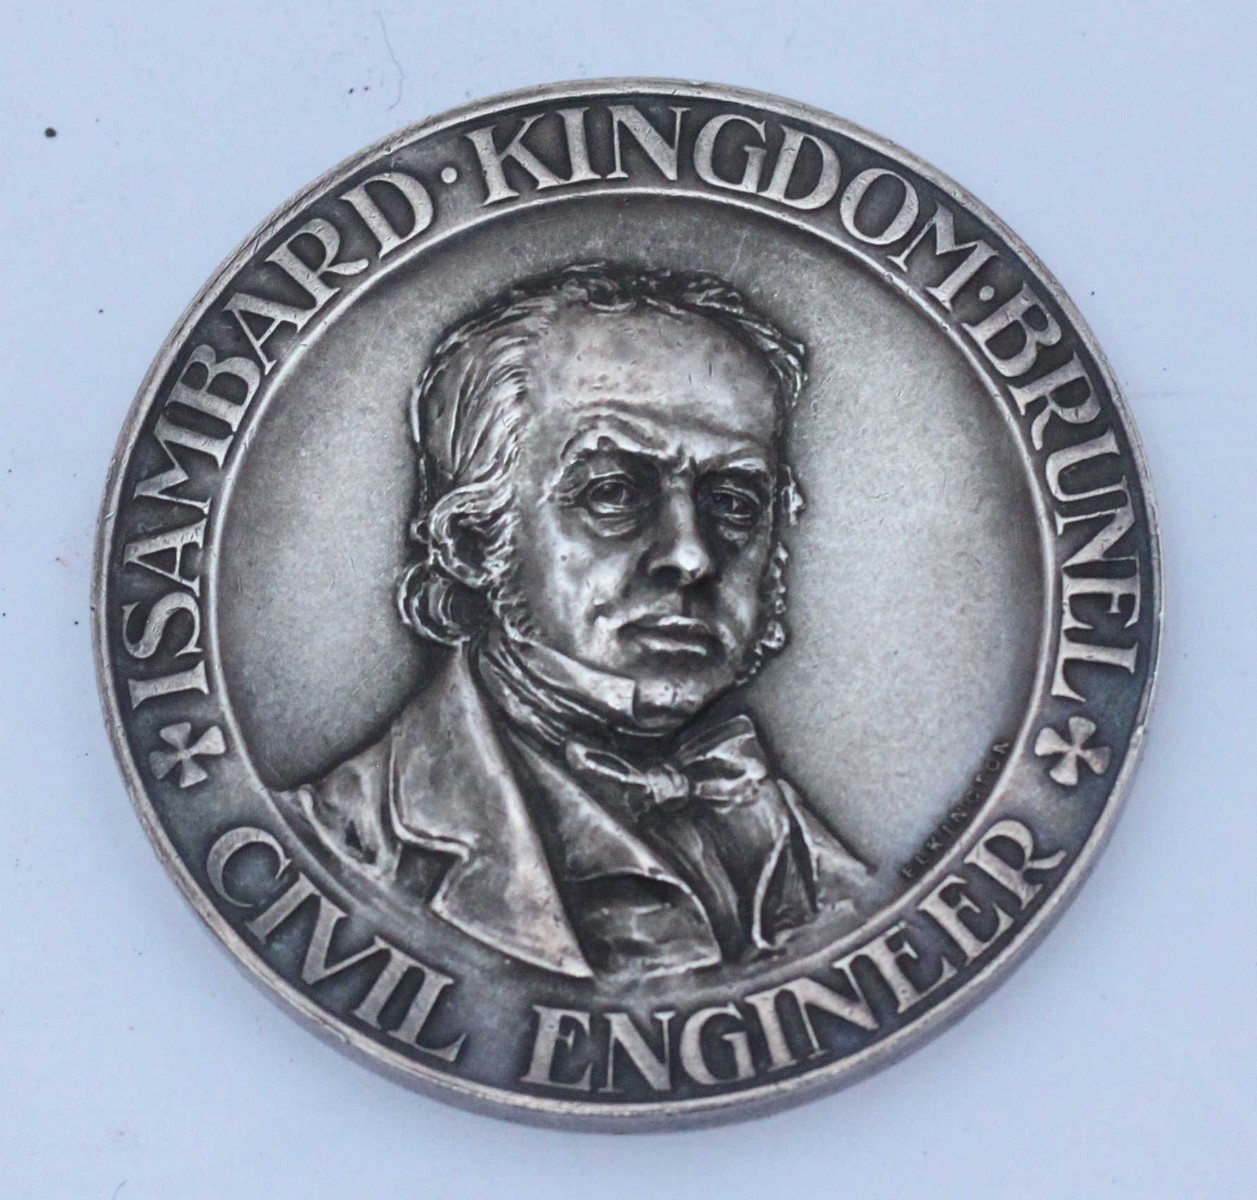 London School of Economics, a silver award medal by Elkington, with relief moulded bust of - Image 3 of 3